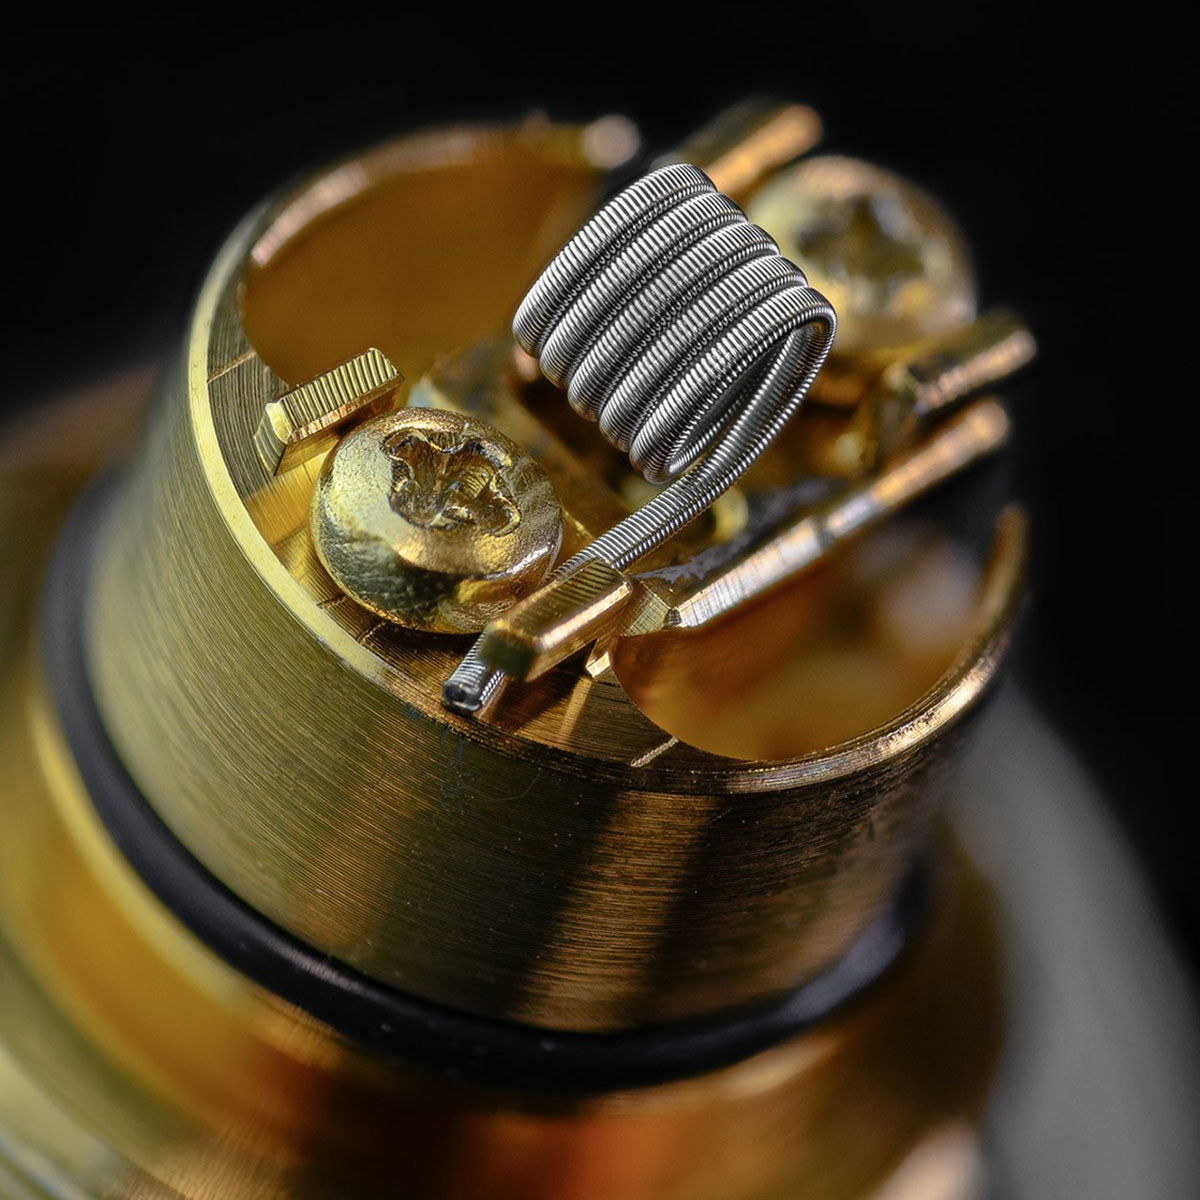 MTL Fused Clapton Coils by Coilturd